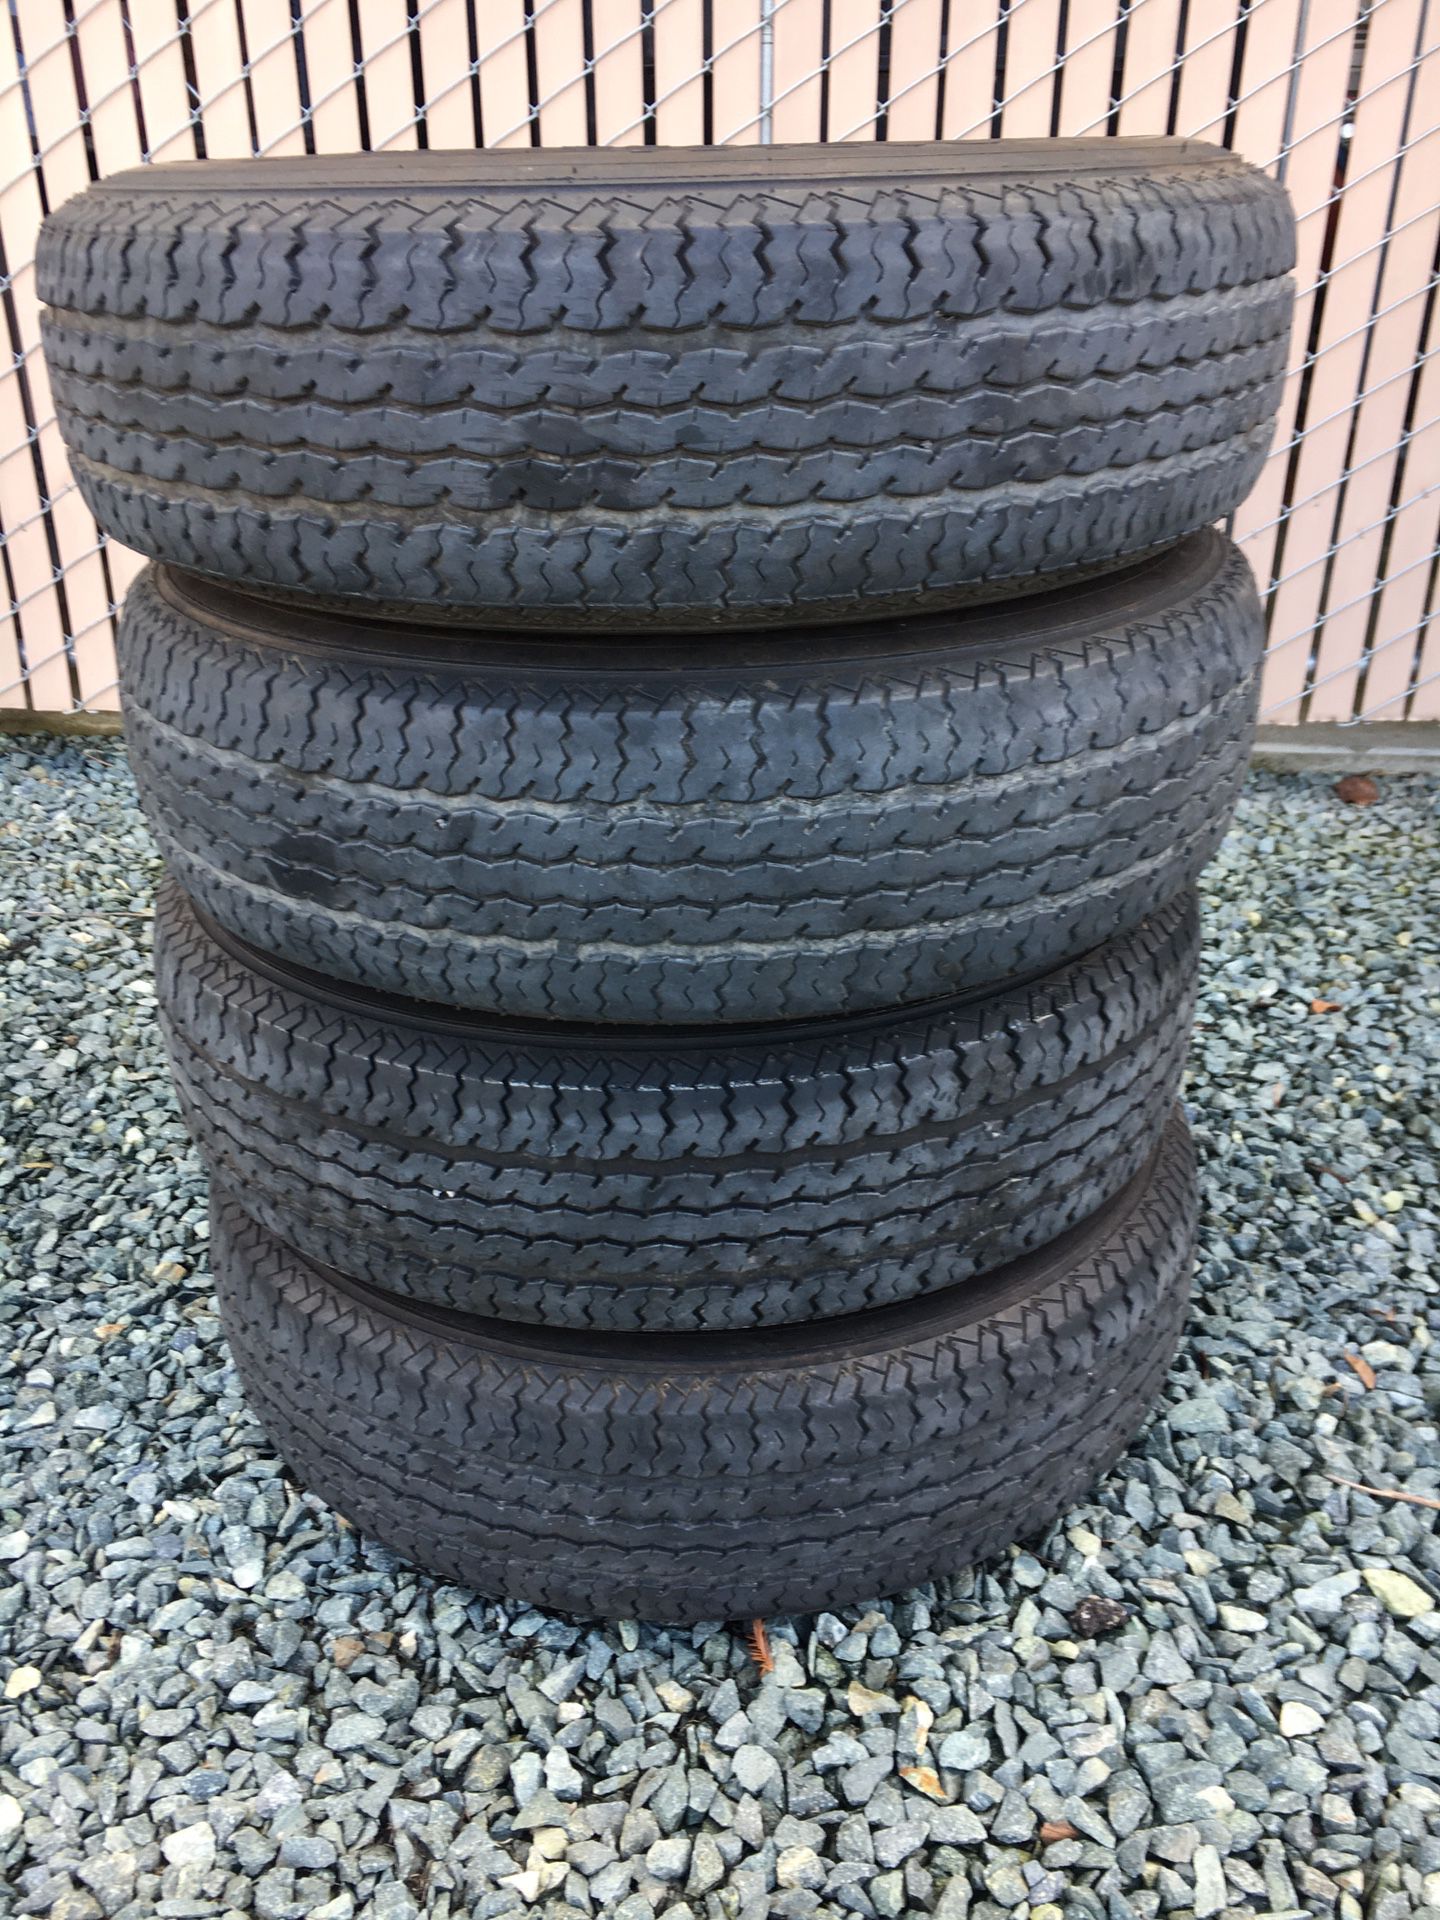 Maxxis M8008 Trailer tires.